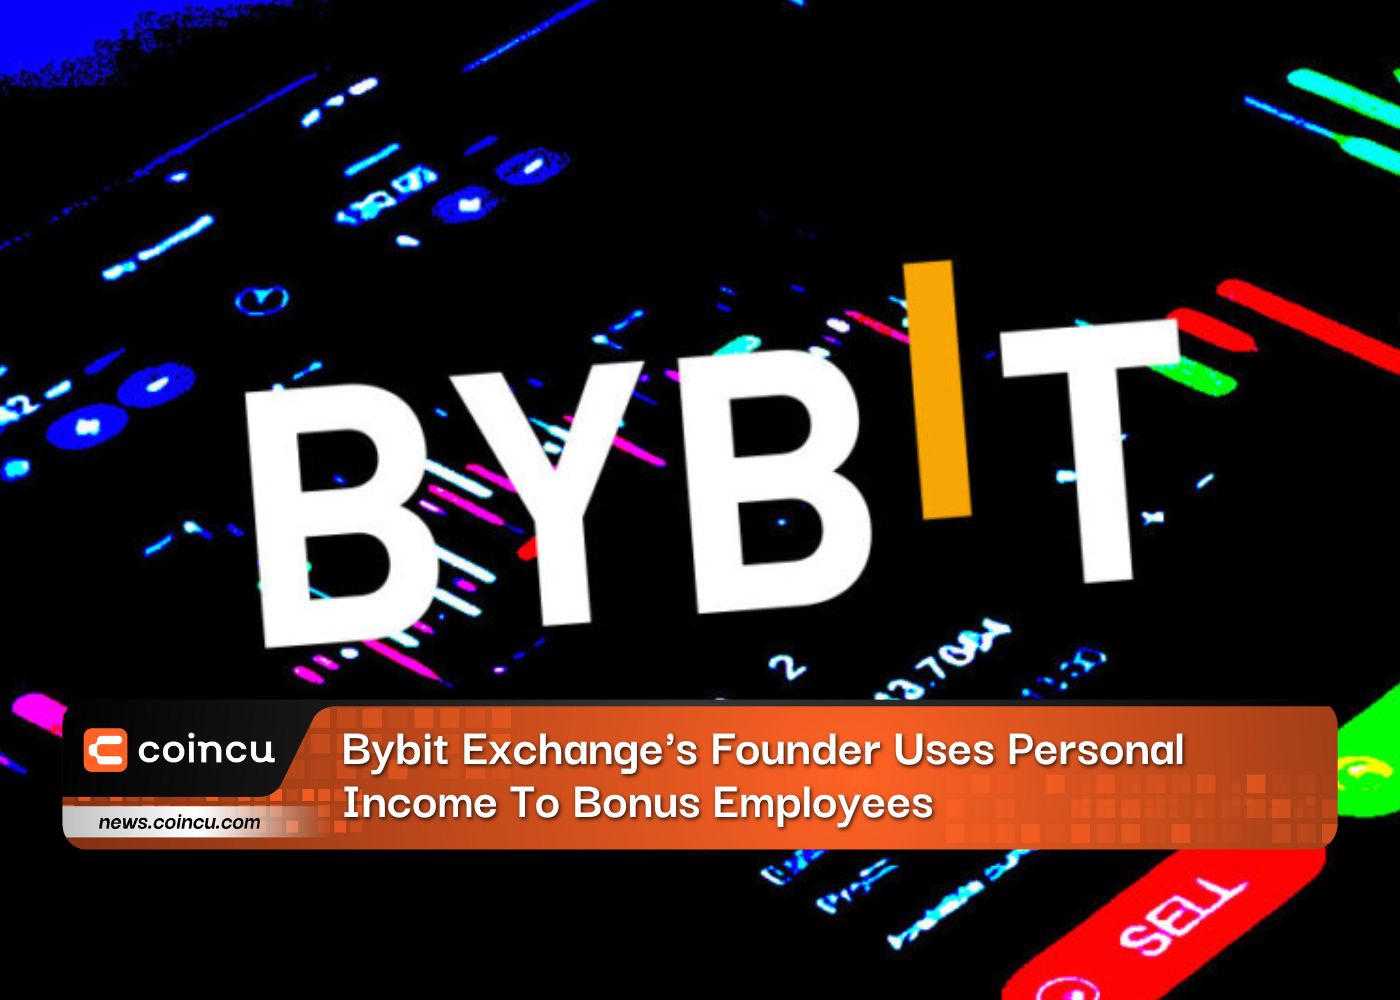 Bybit Exchange's Founder Uses Personal Income To Bonus Employees